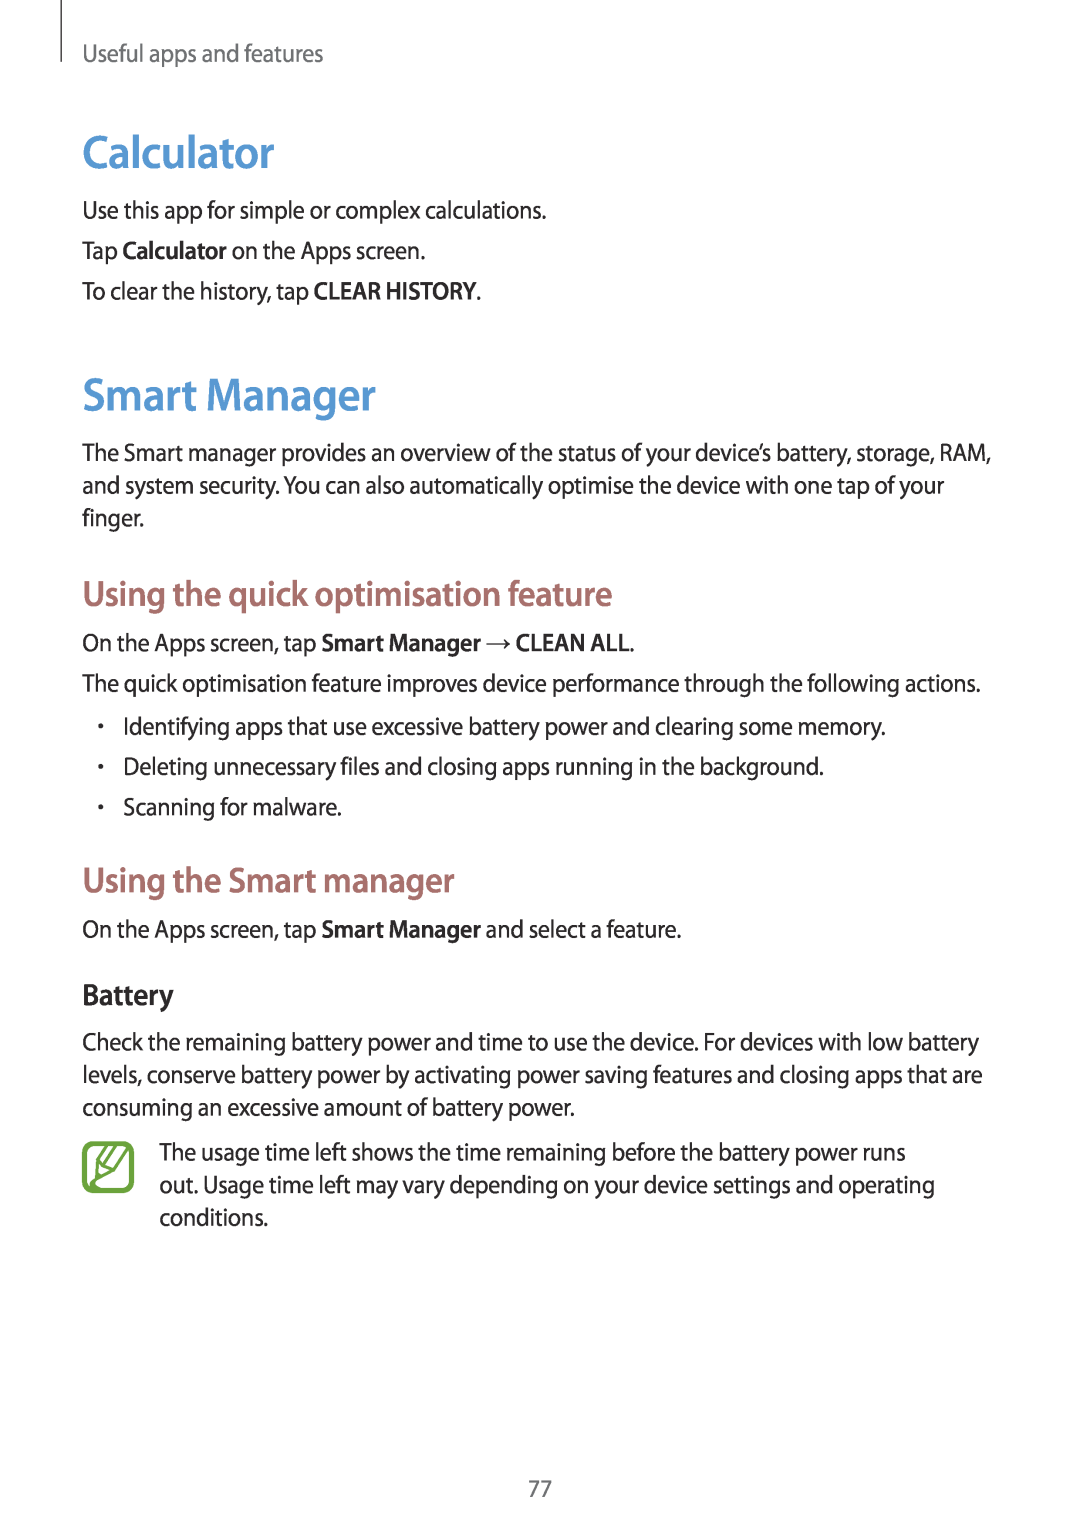 Samsung SM-P550NZBANEE Calculator, Smart Manager, Using the quick optimisation feature, Using the Smart manager, Battery 